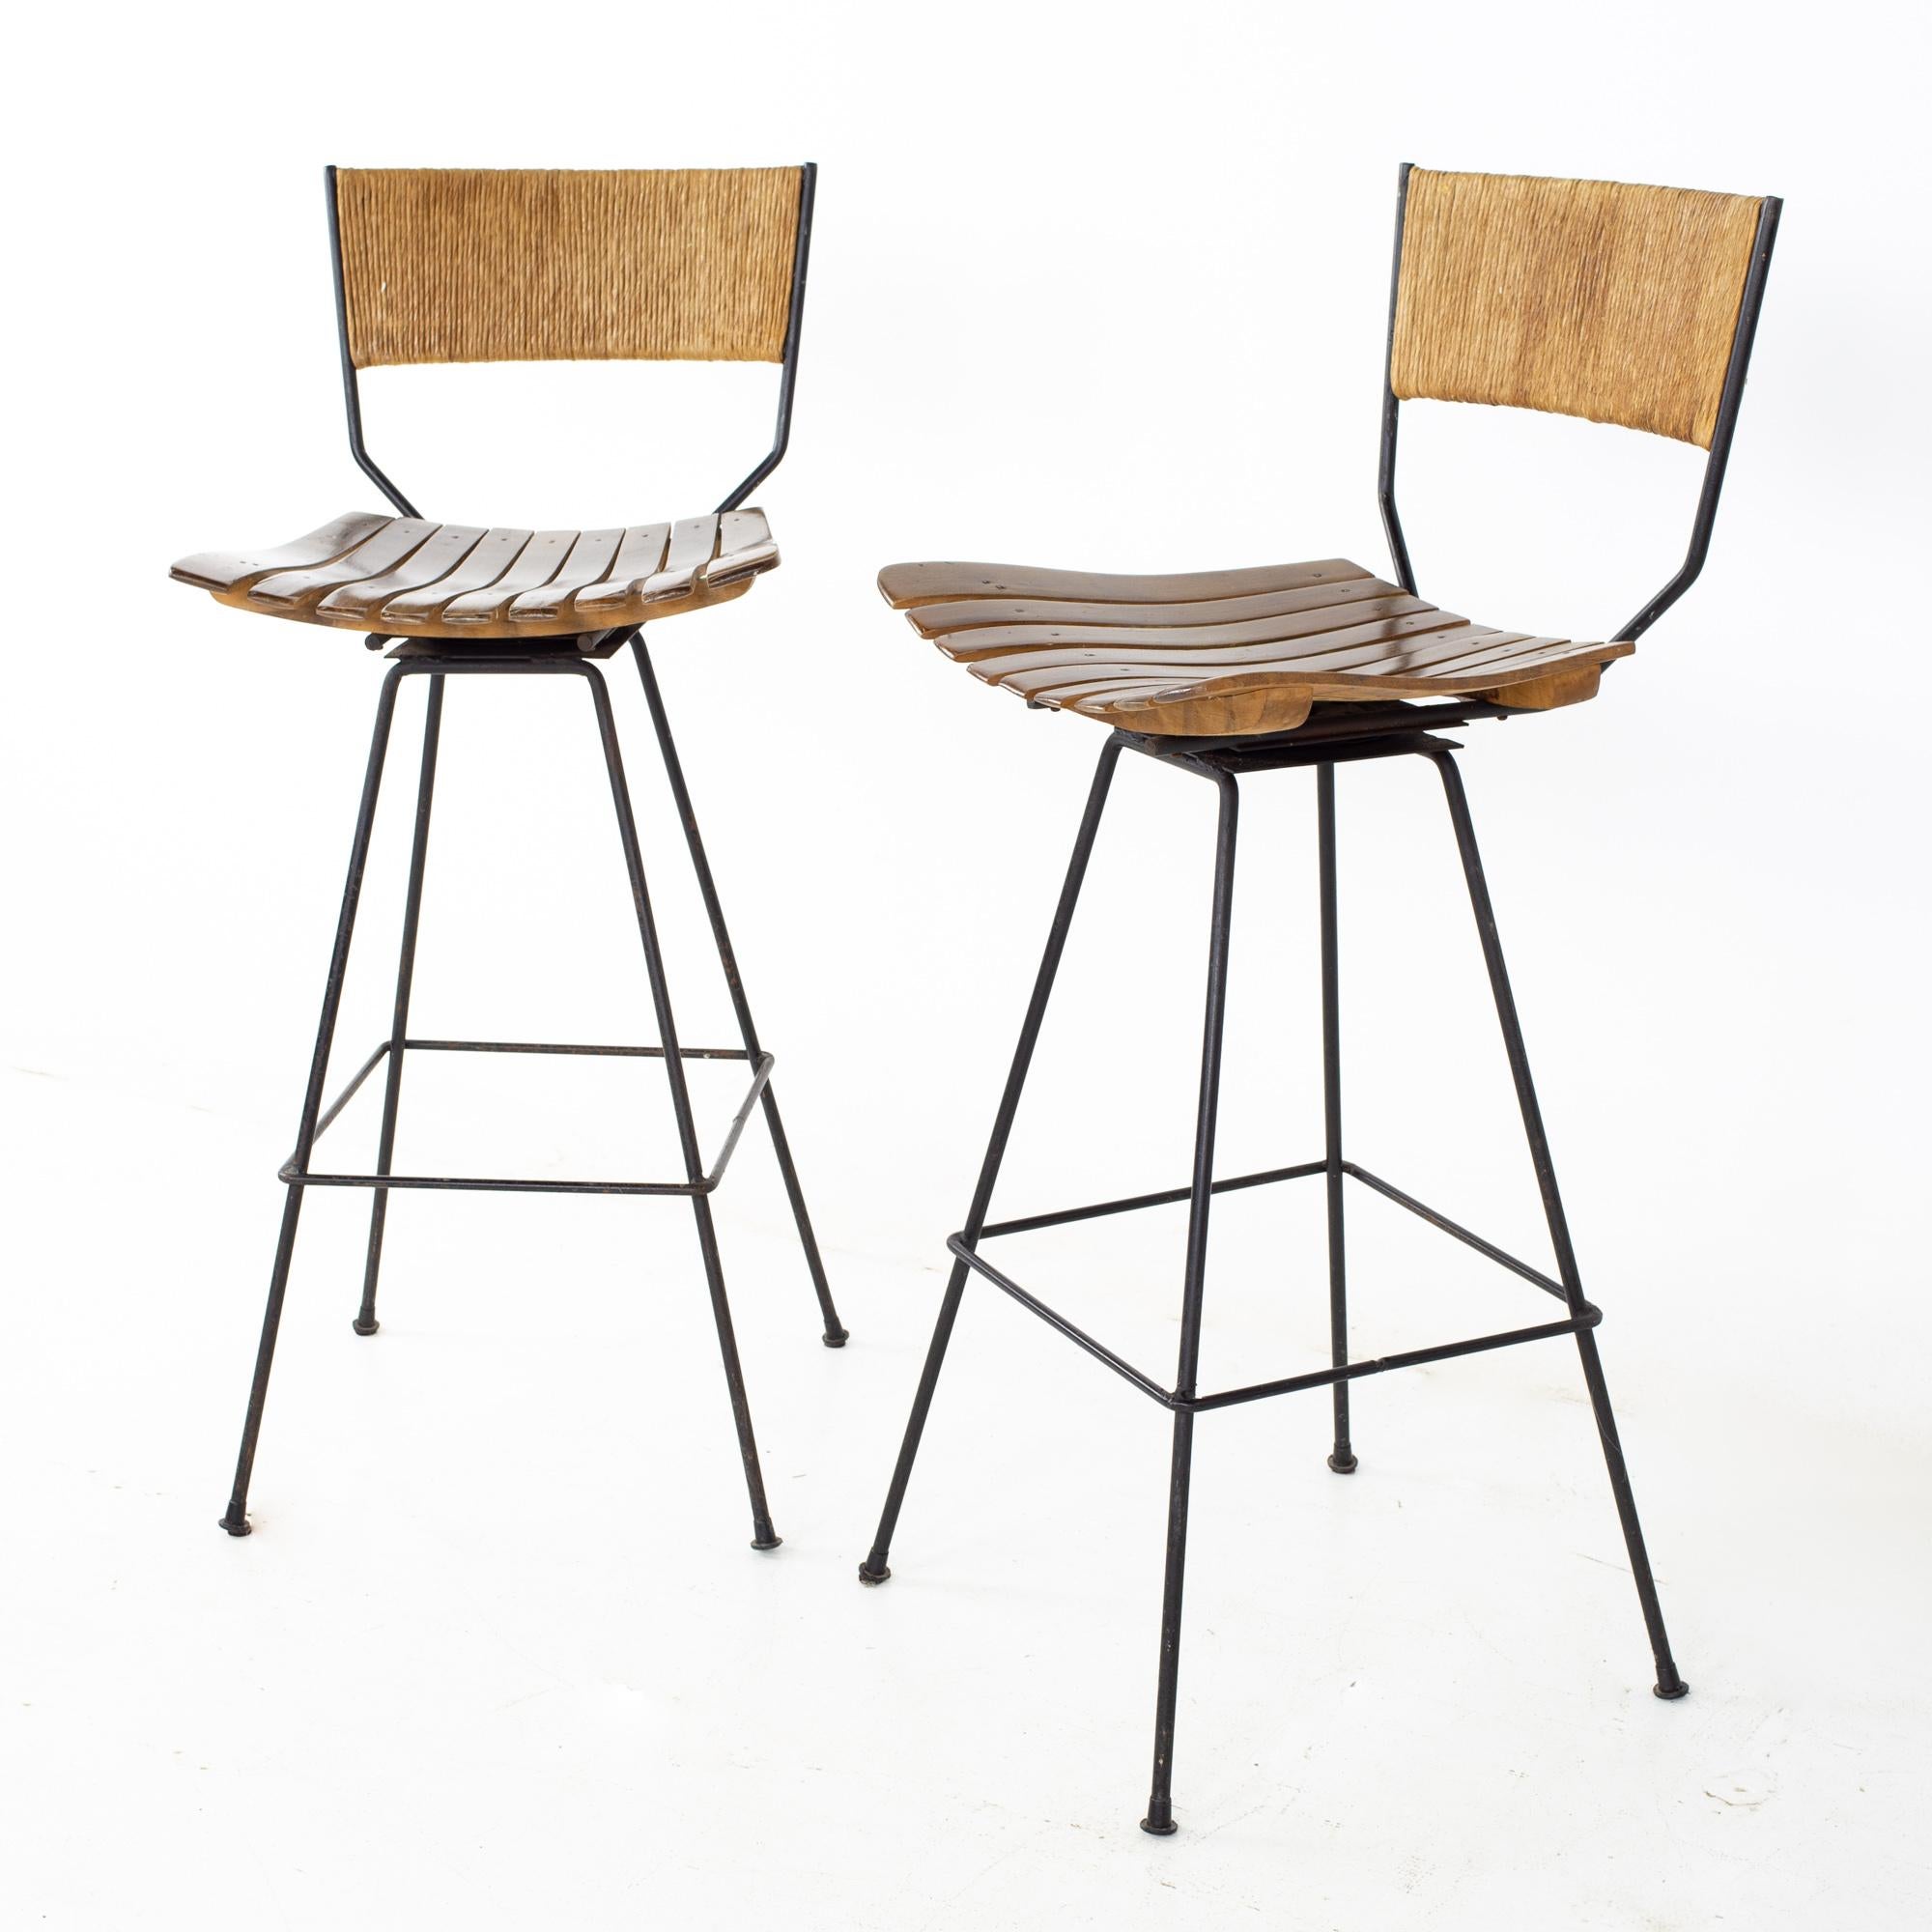 Arthur Umanoff mid century roped wood and iron bar stools - a pair
Each stool measures: 18 wide x 18 deep x 40.5 high, with a seat height of 30.5 inches

All pieces of furniture can be had in what we call restored vintage condition. That means